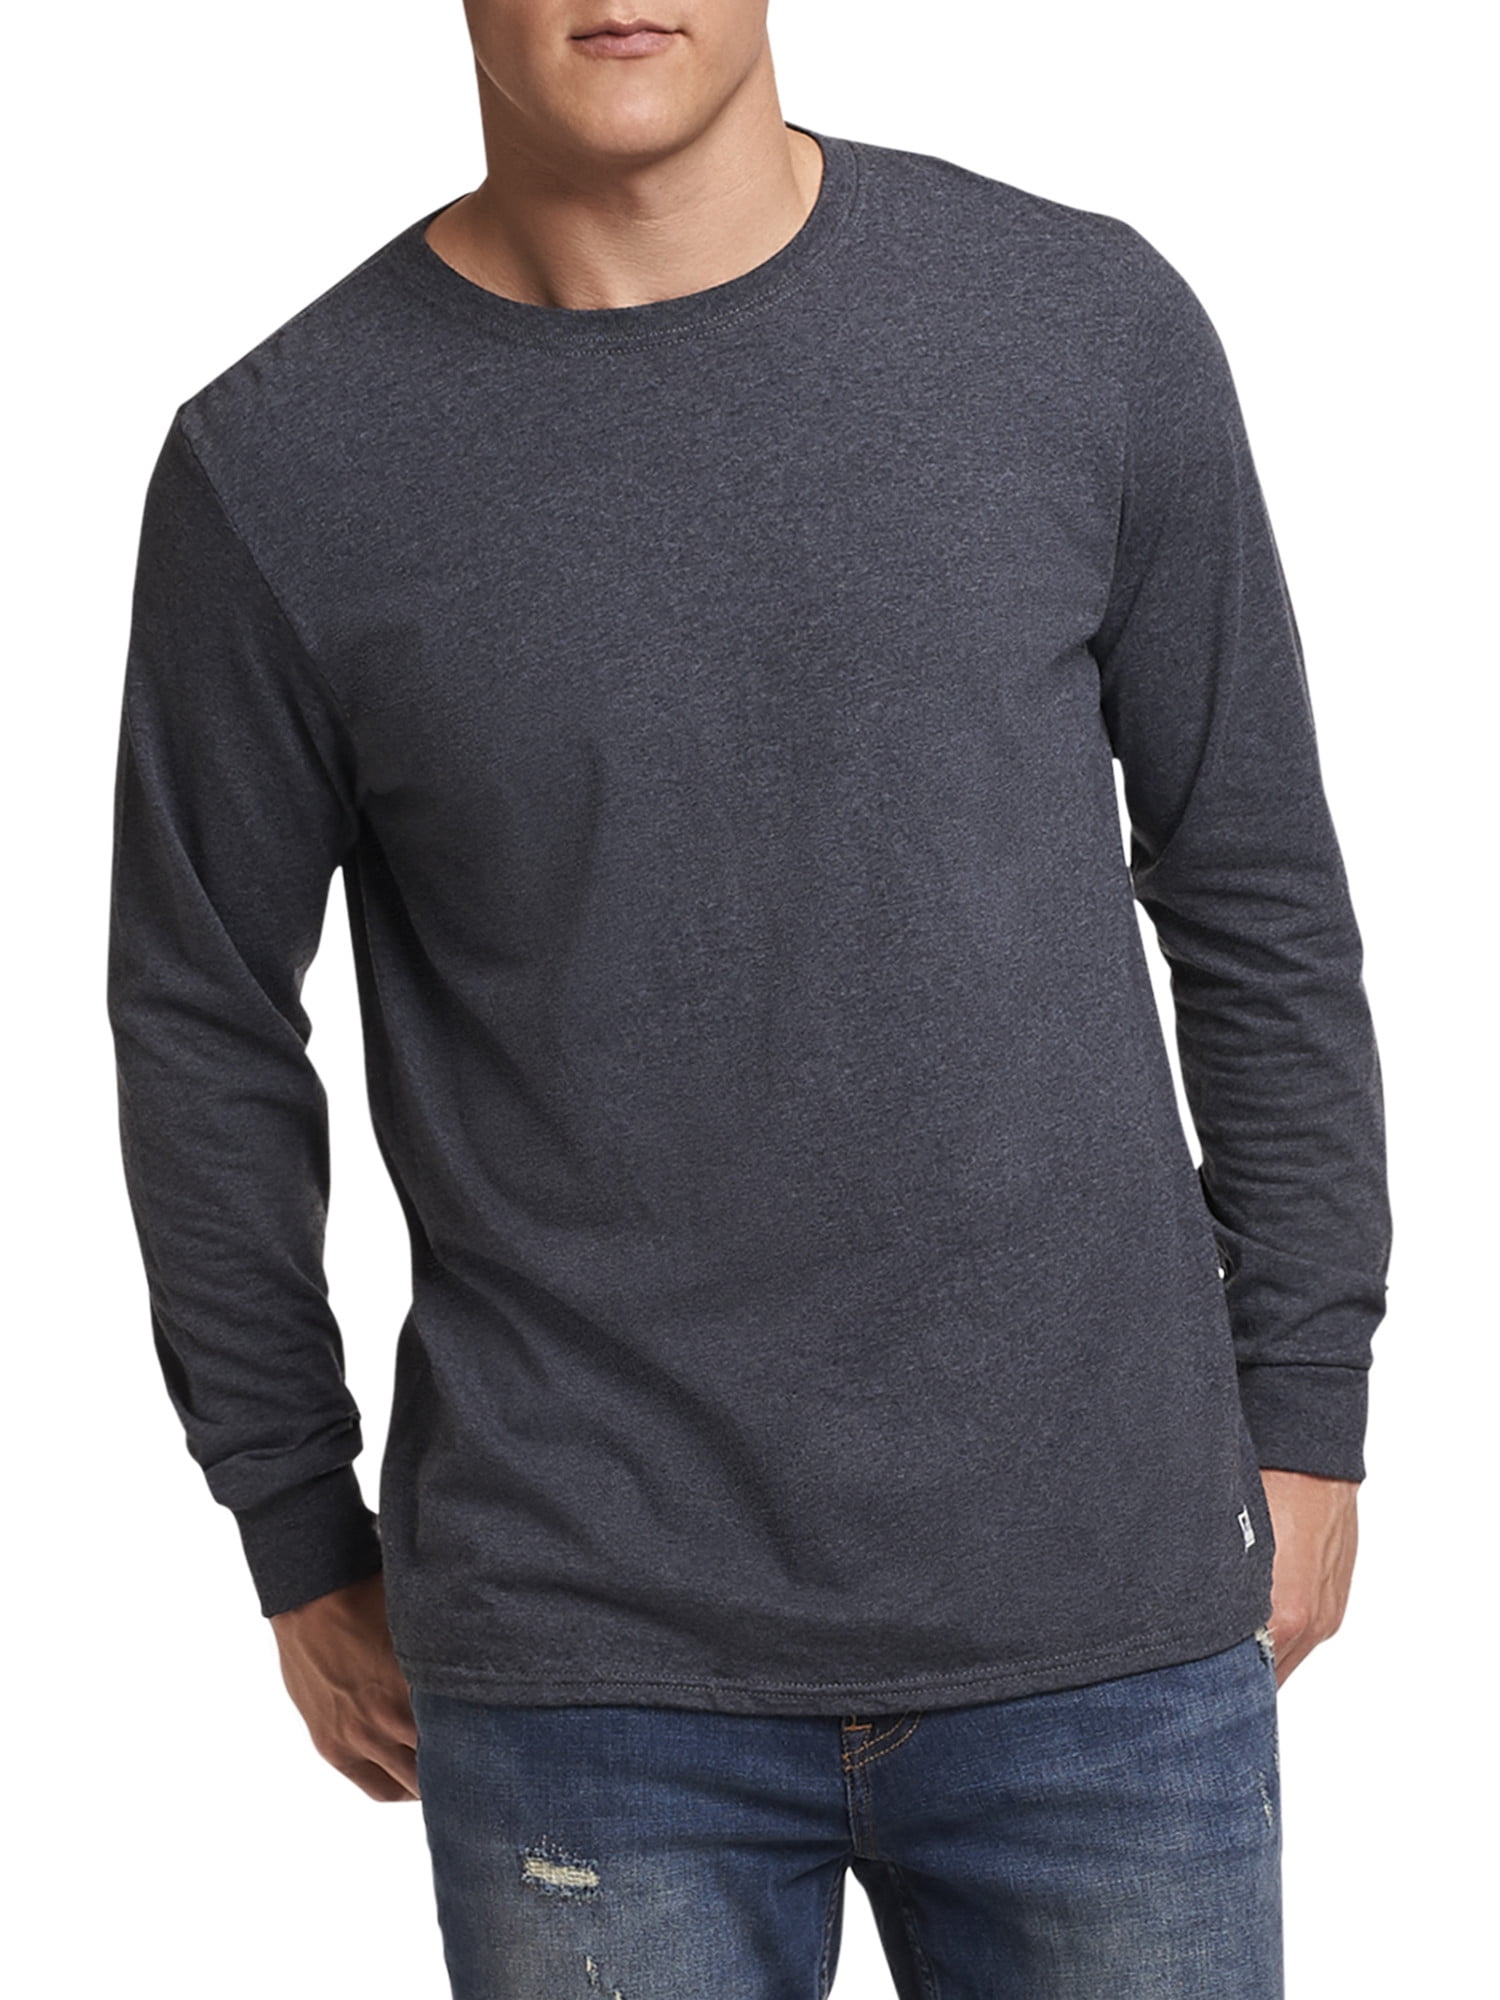 Russell Athletic - Russell Athletic Men's and Big Men's Long Sleeve ...